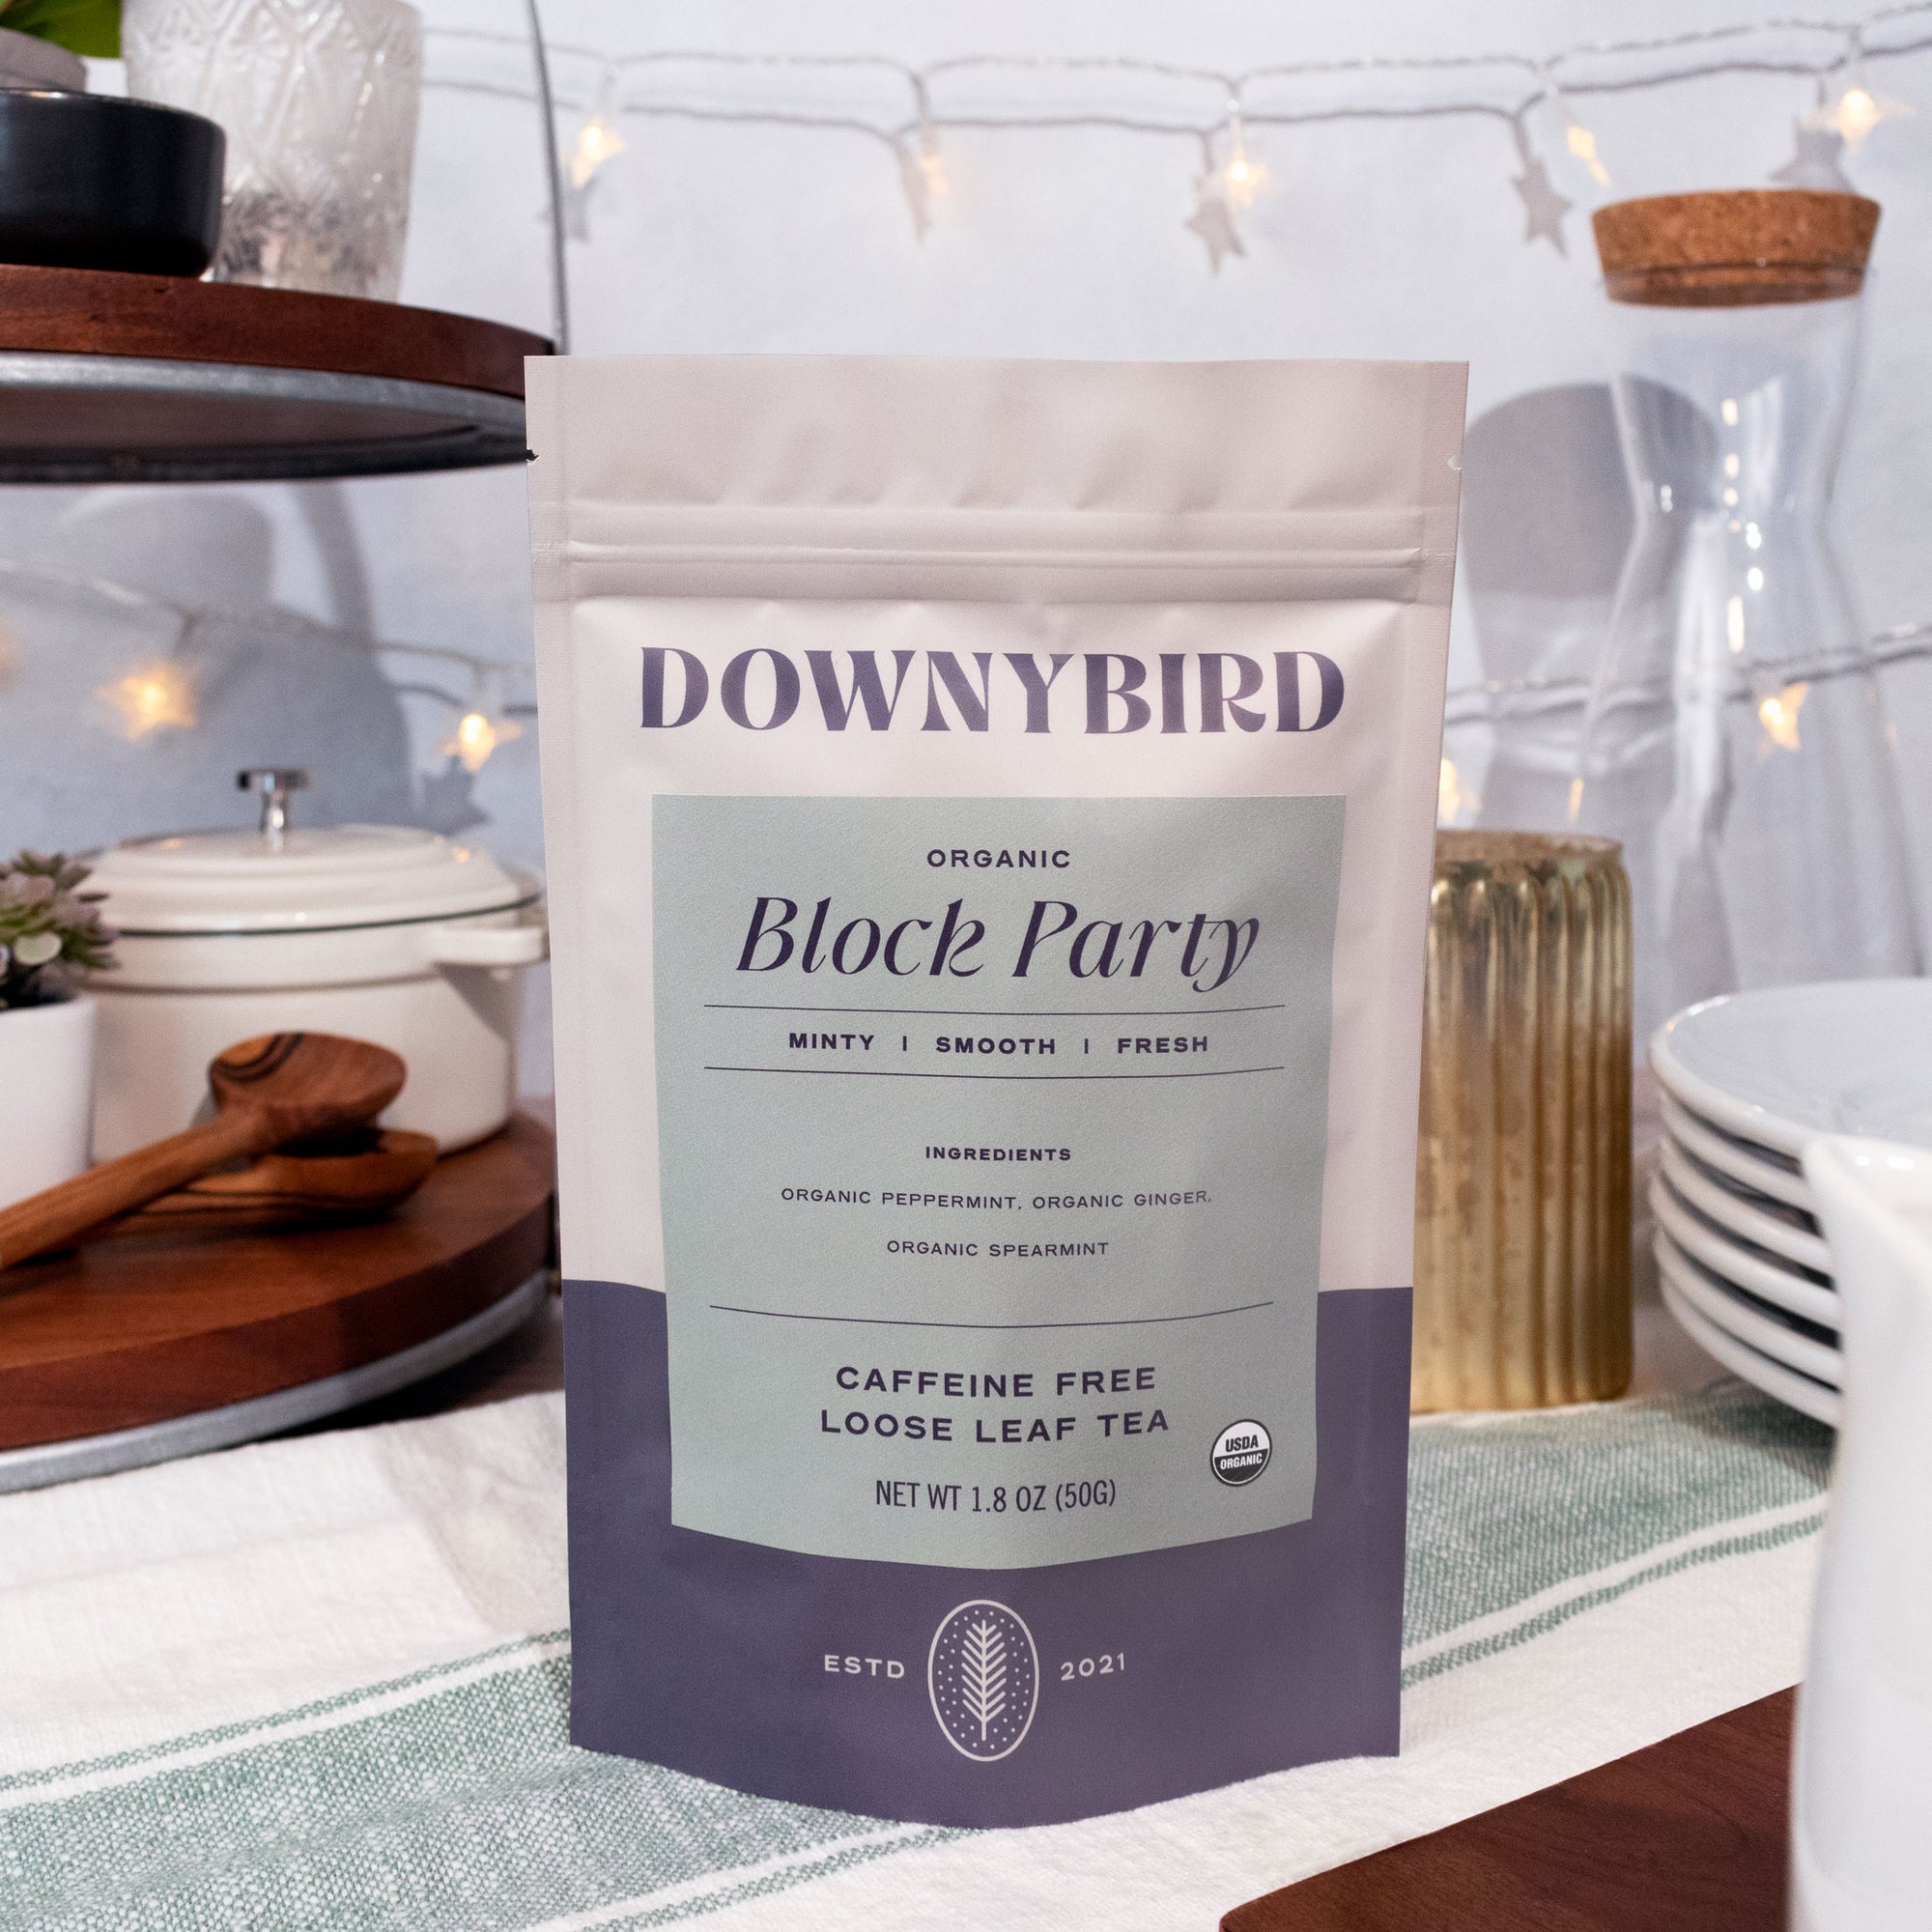 Downybird Block Party Blend Organic Peppermint Loose Leaf Tea Pouch on Outdoor Table